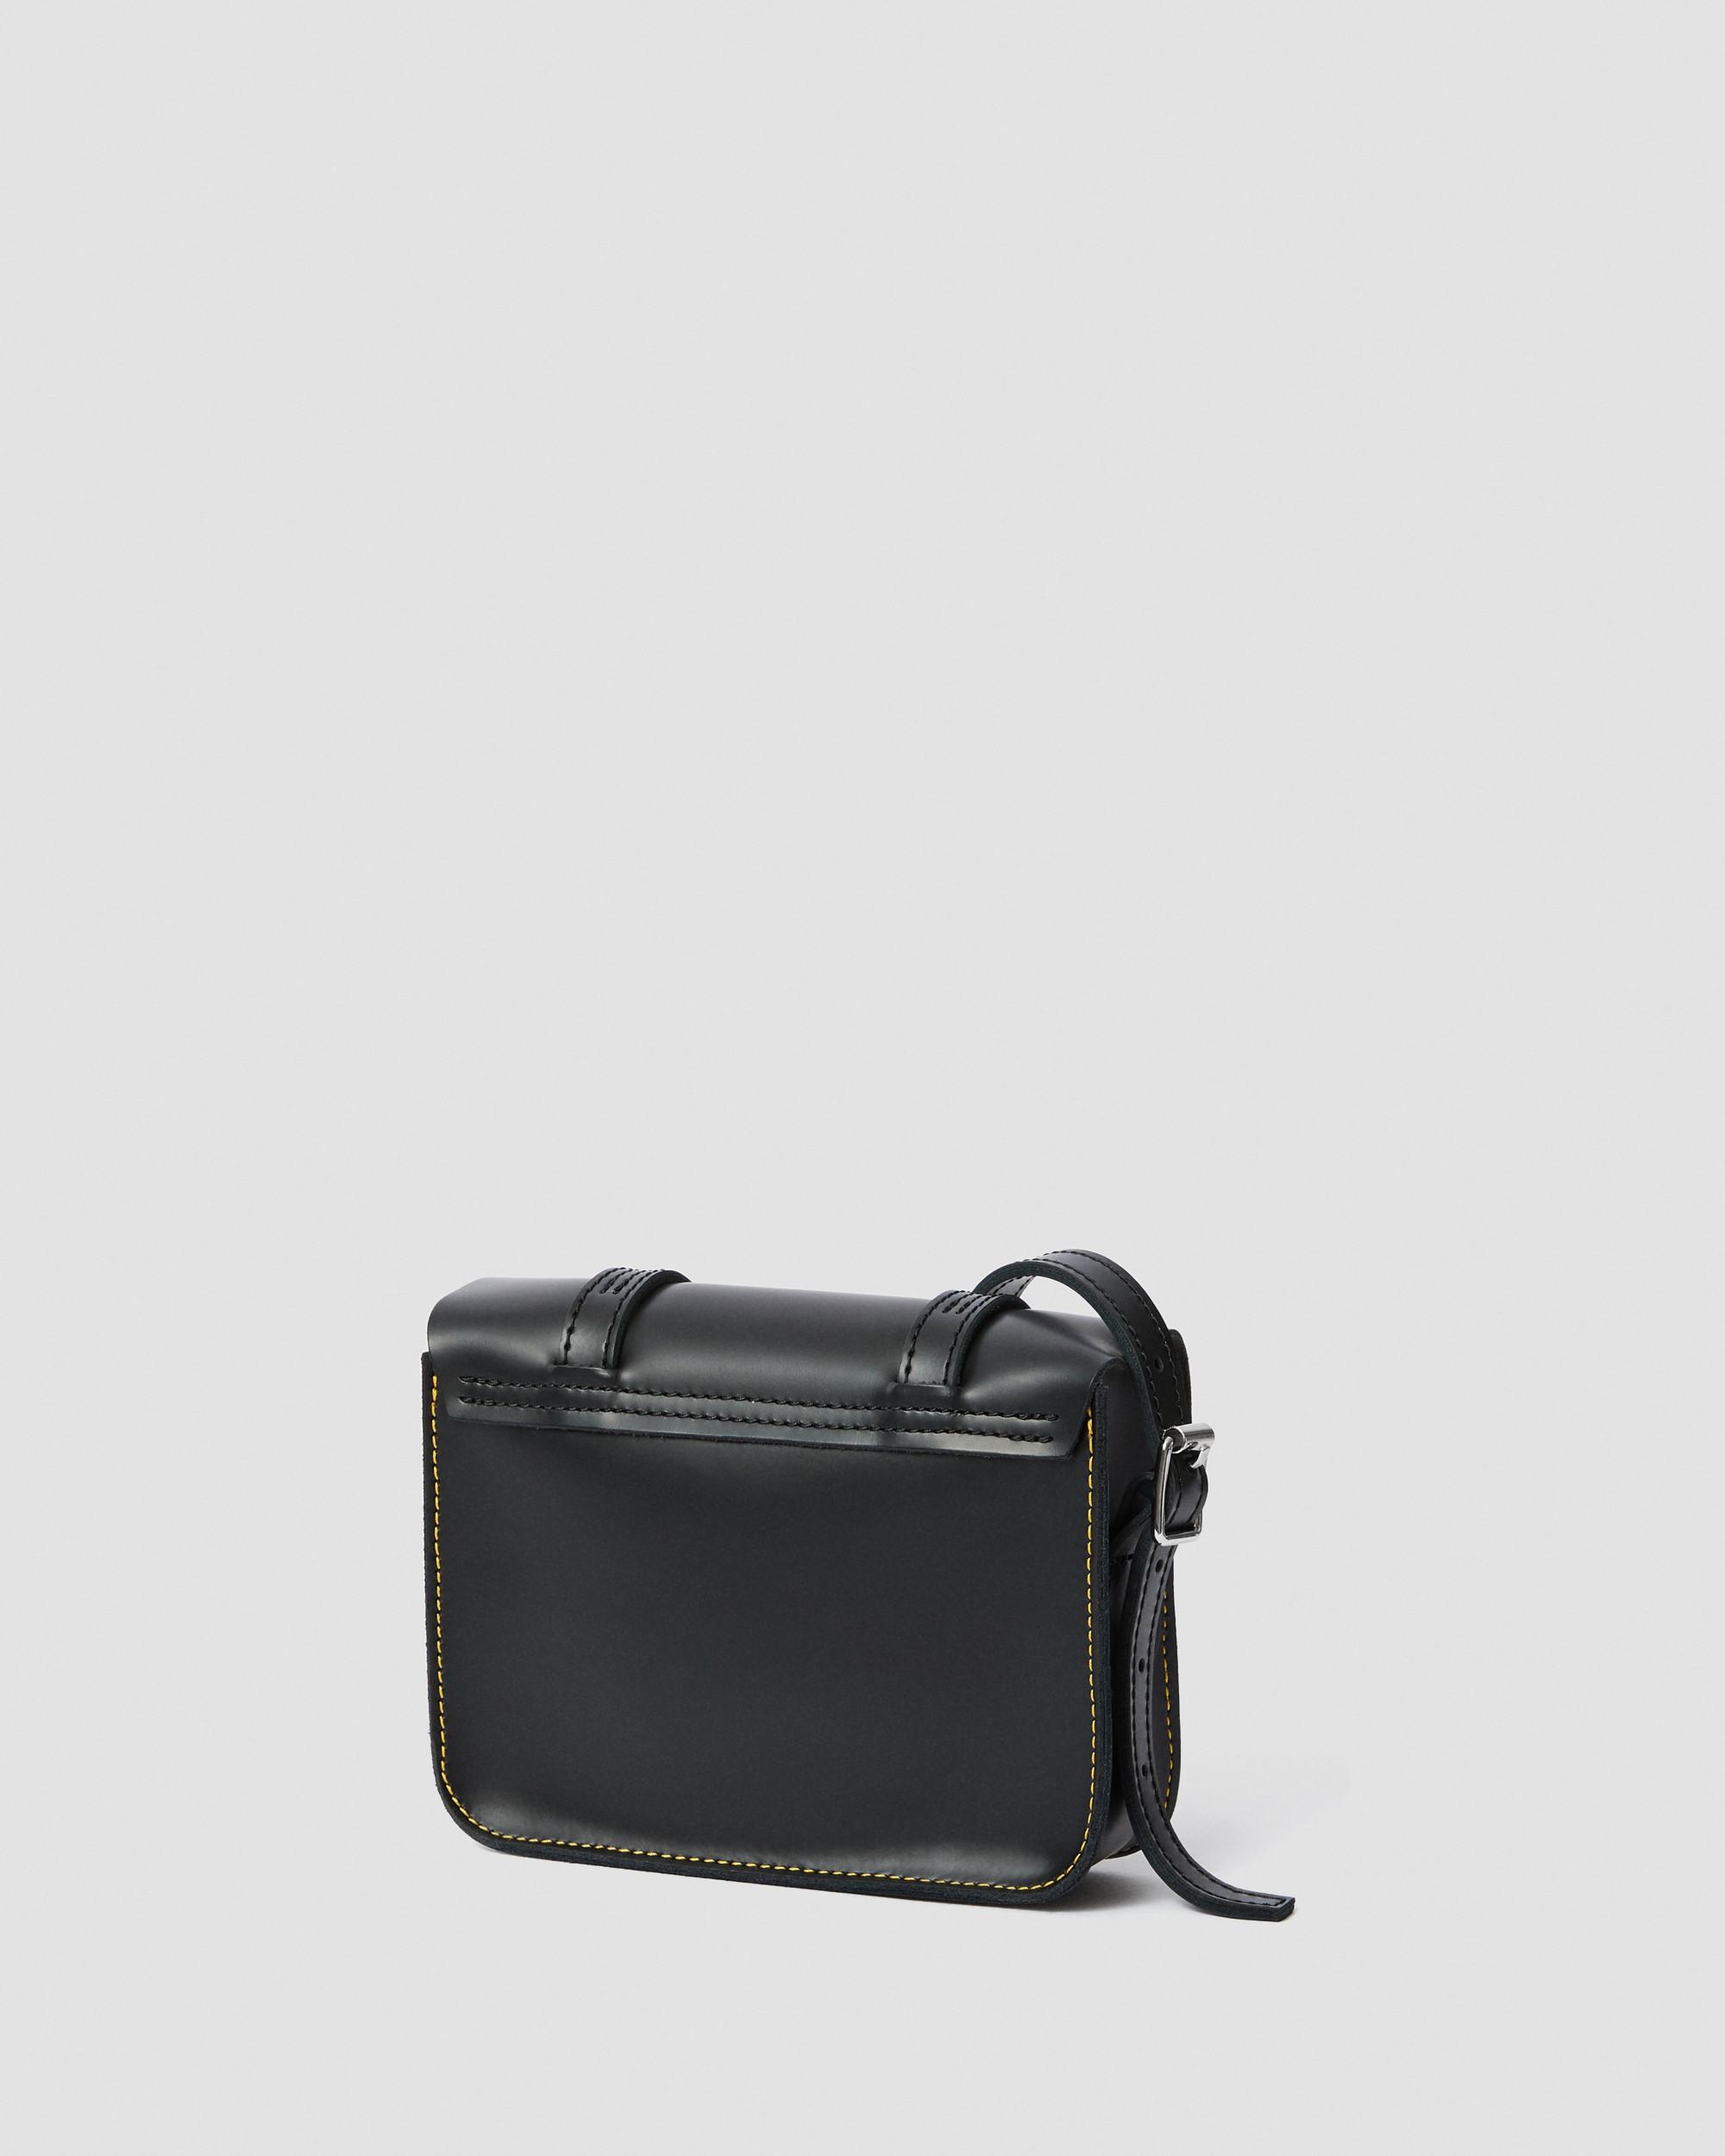 Dr. Martens 7 inch Patent Leather Crossbody Camera Bag